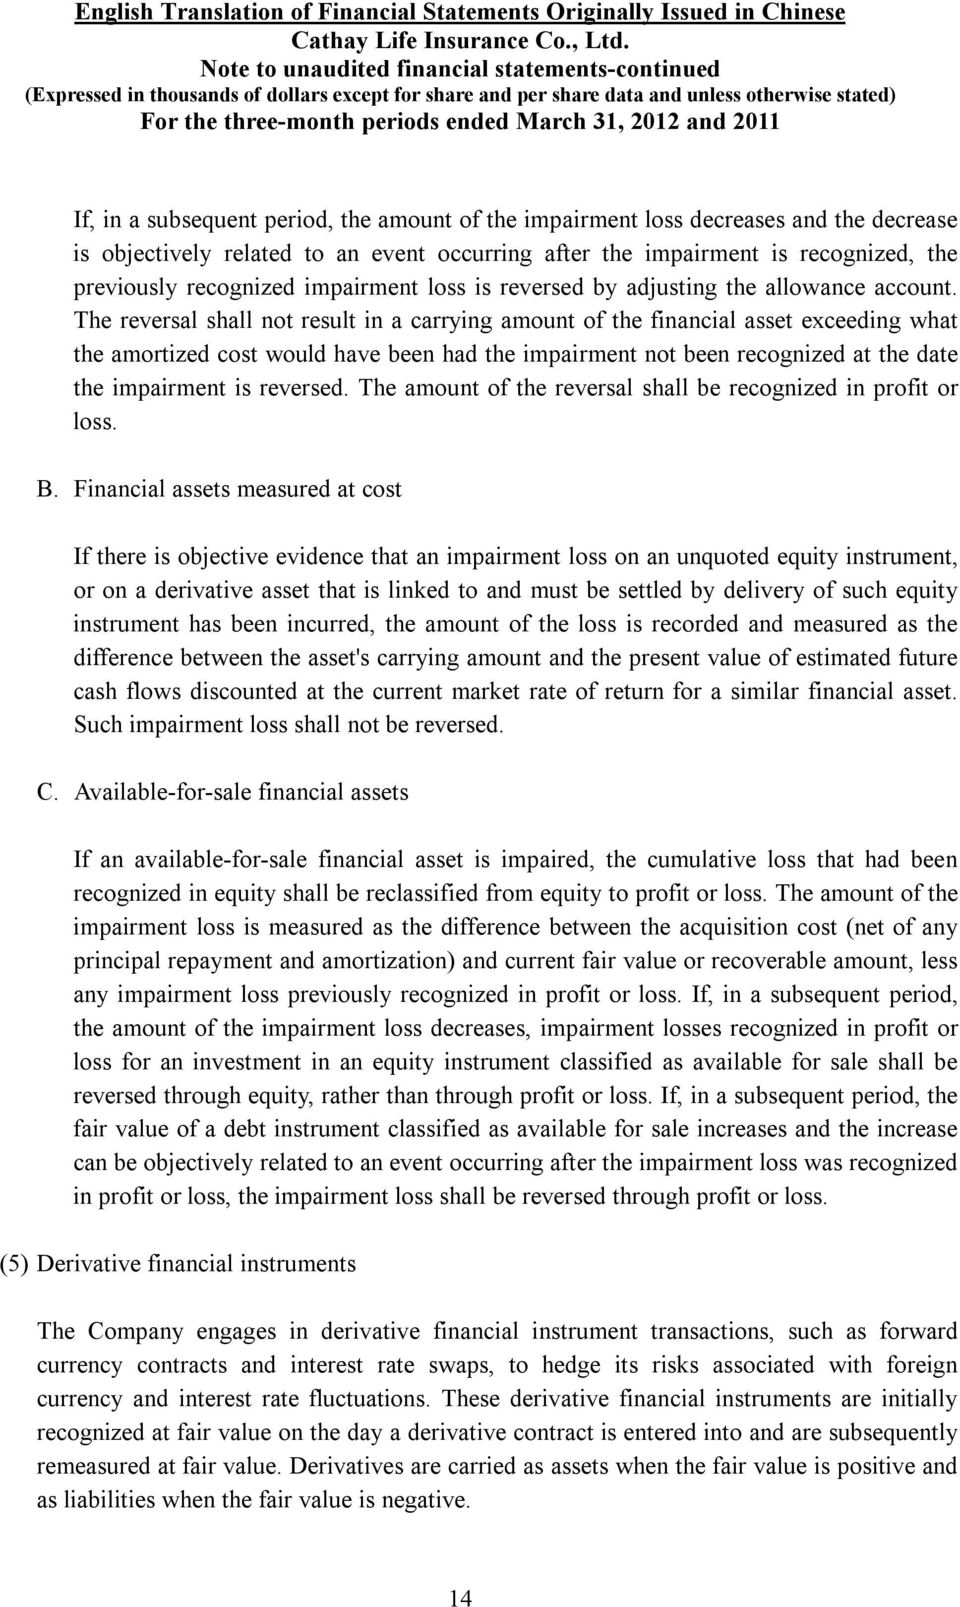 The reversal shall not result in a carrying amount of the financial asset exceeding what the amortized cost would have been had the impairment not been recognized at the date the impairment is